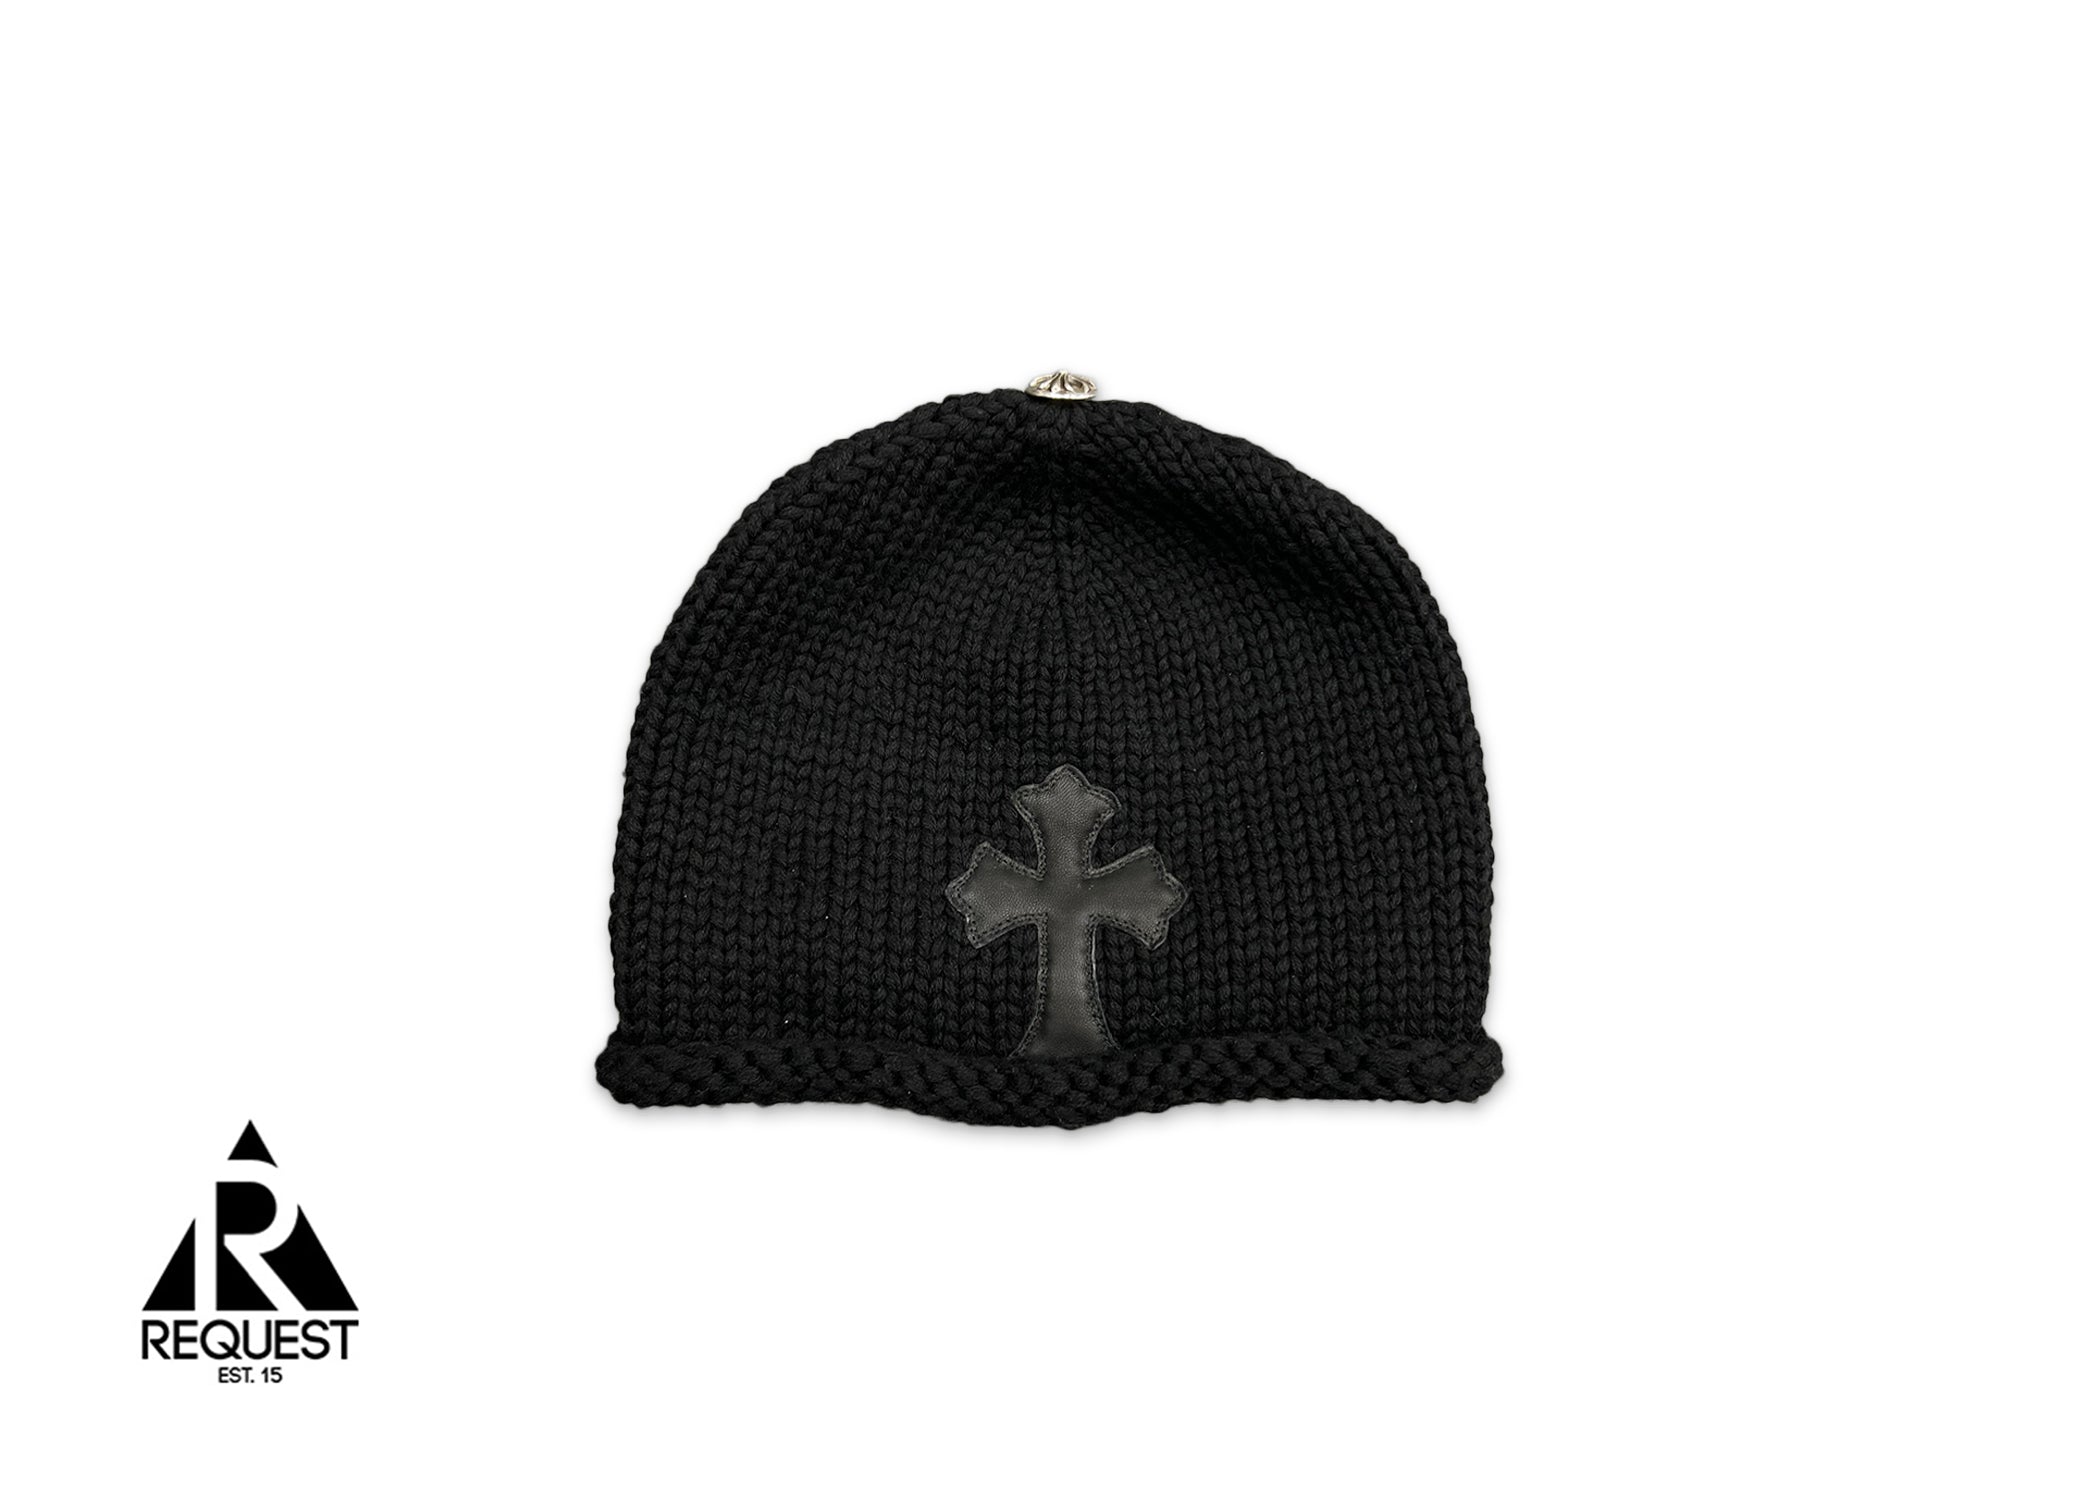 Chrome Hearts Knitted Leather Cross Beanie "Black"